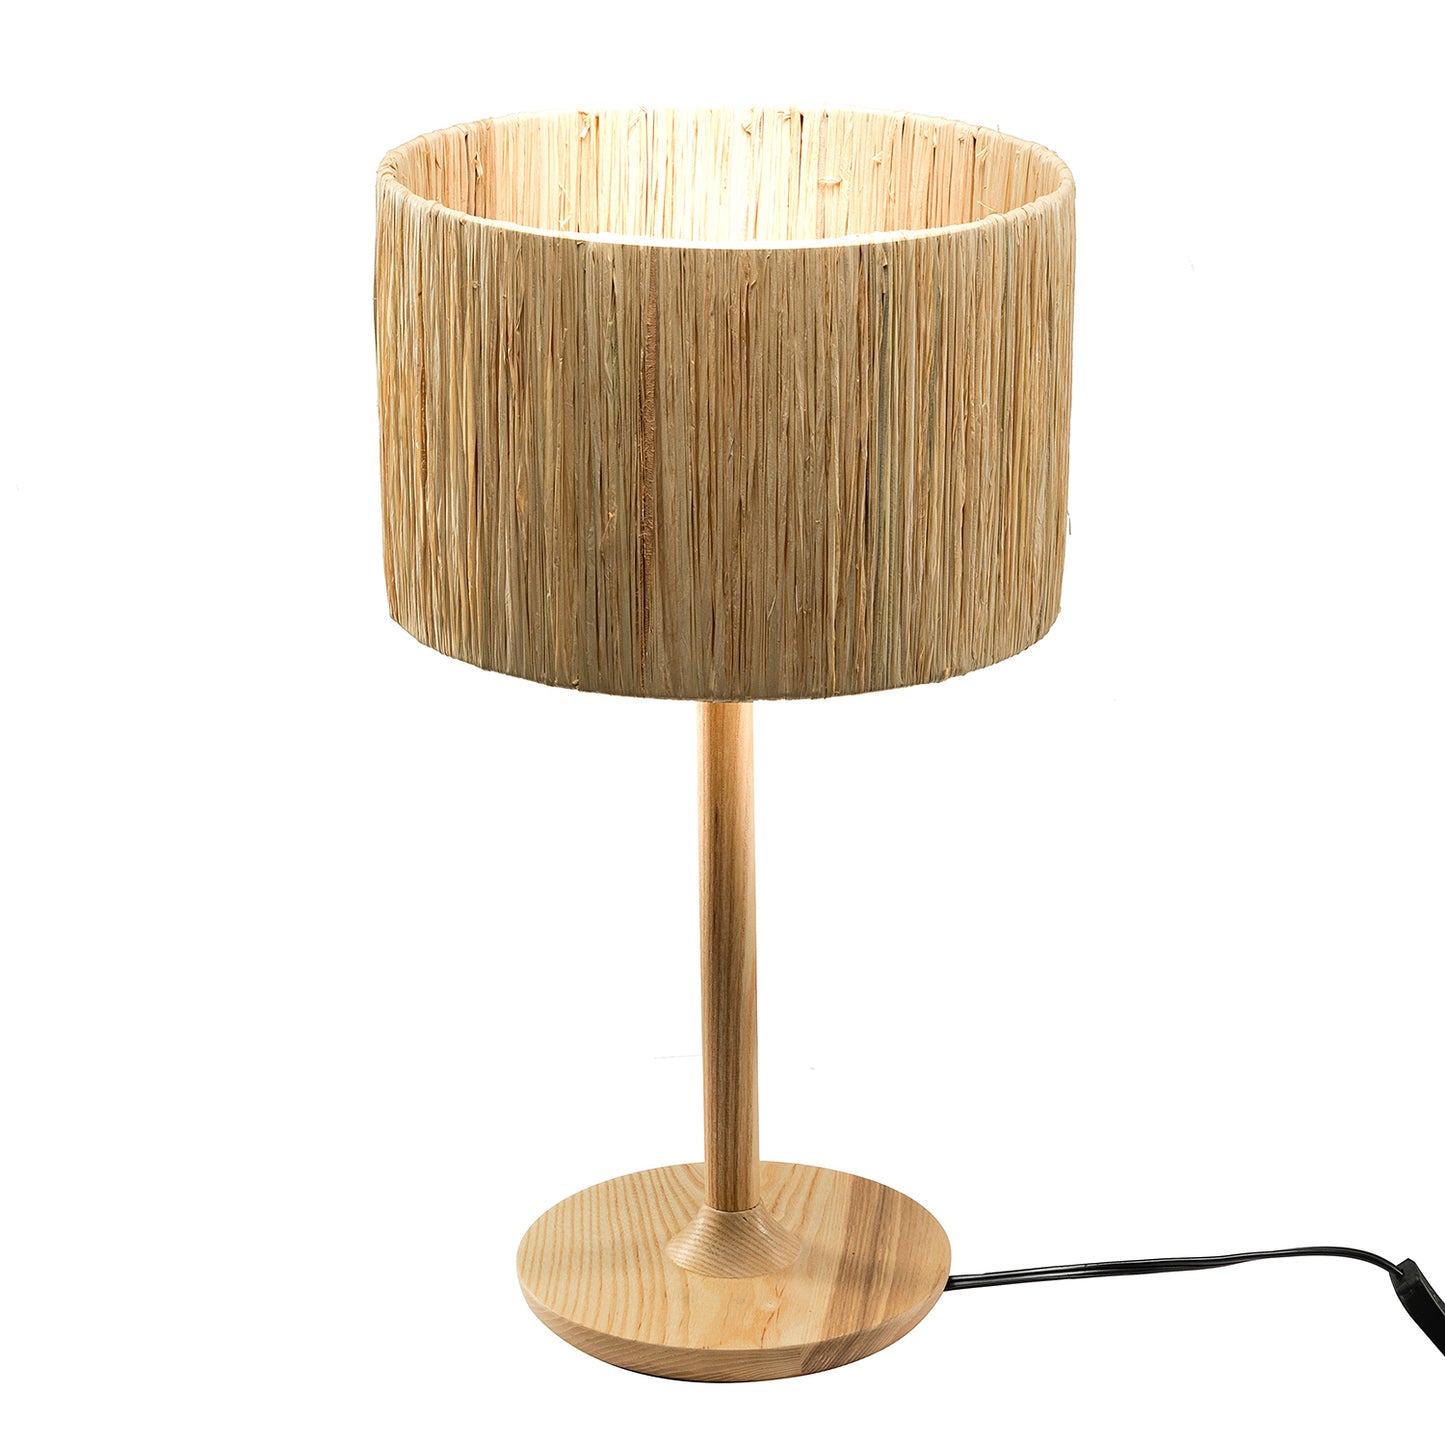 Thebae Solid Wood  21.3" Table Lamp with In-line Switch Control